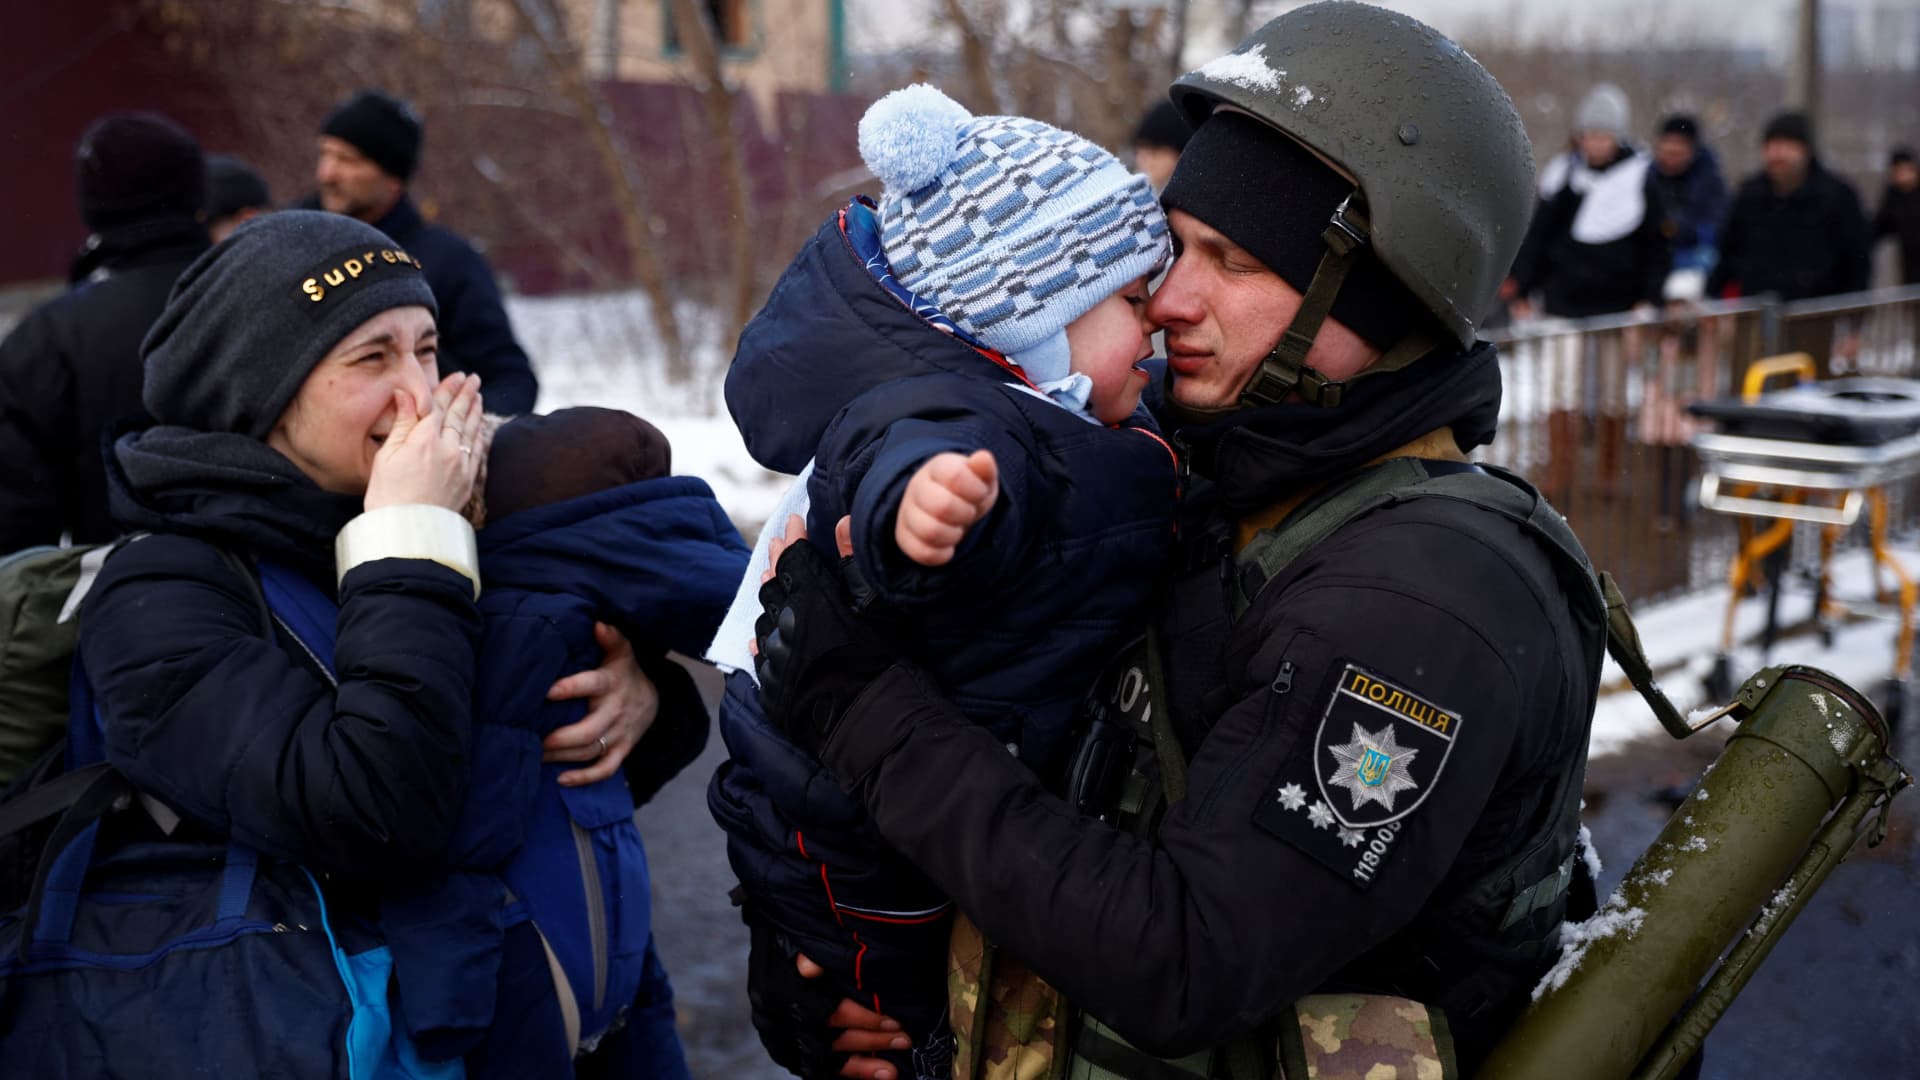 A police officer says goodbye to his son as his family flees from advancing Russian troops as Russia's attack on Ukraine continues in the town of Irpin outside Kyiv, Ukraine, March 8, 2022.